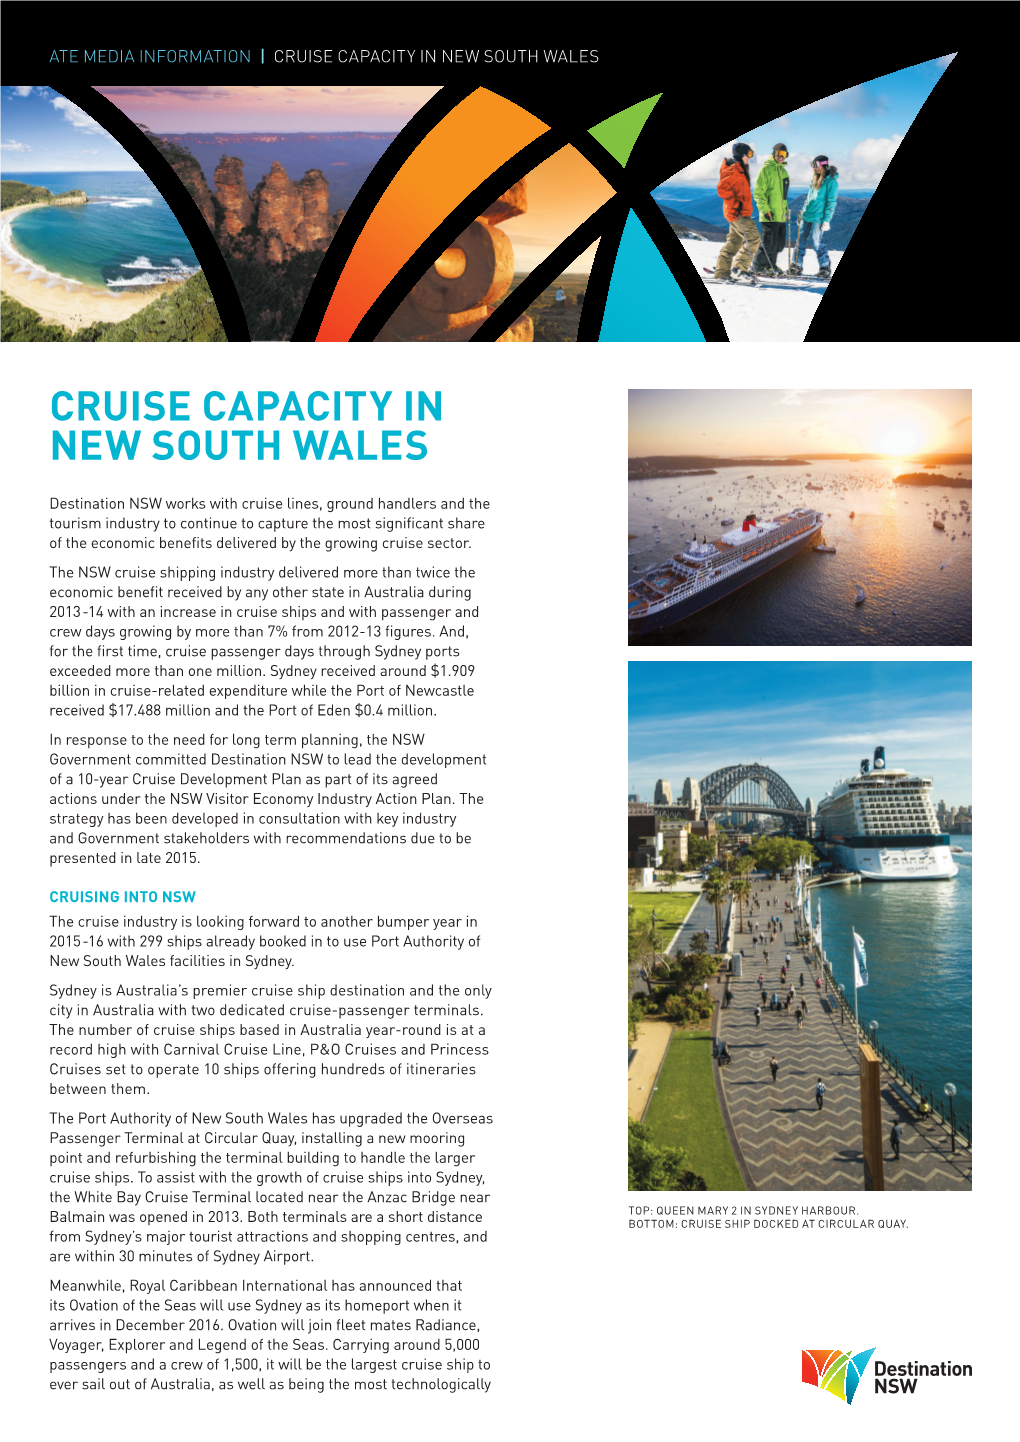 Cruise Capacity in New South Wales